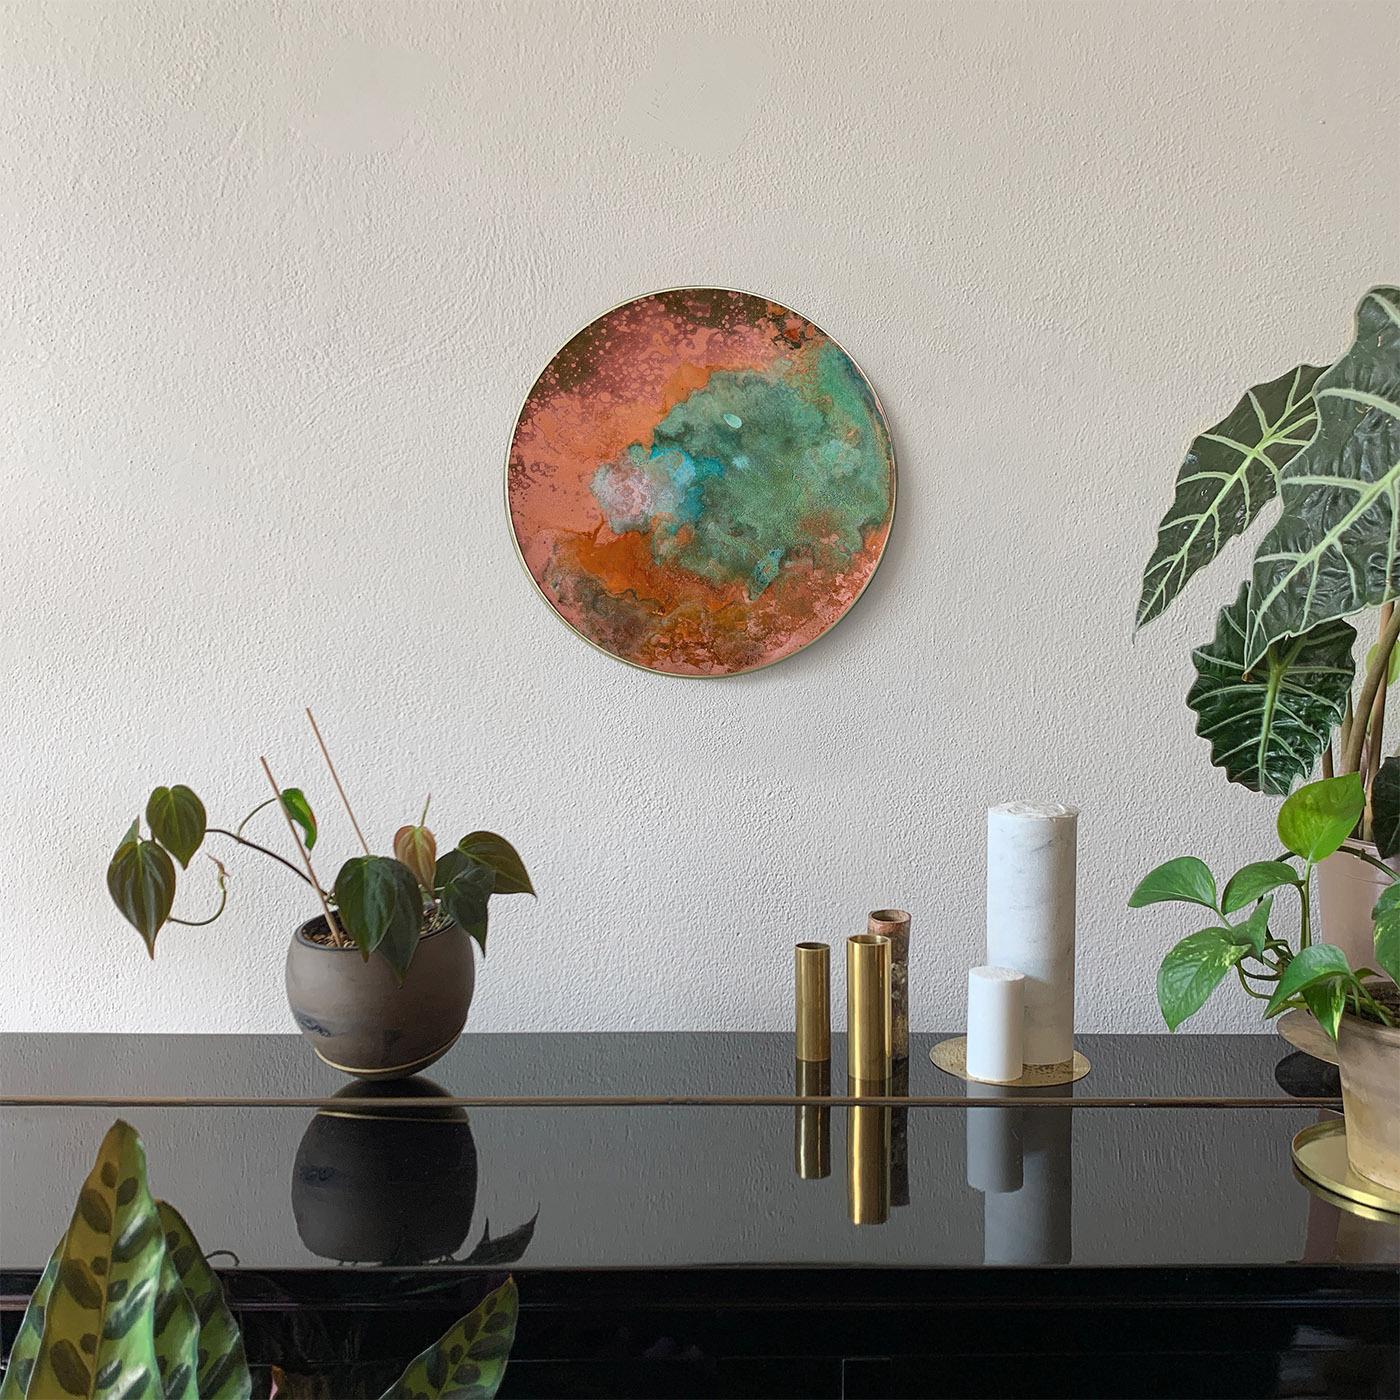 An intriguing shaded effect where orange, turquoise, pink, and blue clouds interact marks this singular decorative disk part of the Aurora Collection. Fashioned of brass, it achieves its characteristic corroded look thanks to acids and the unique